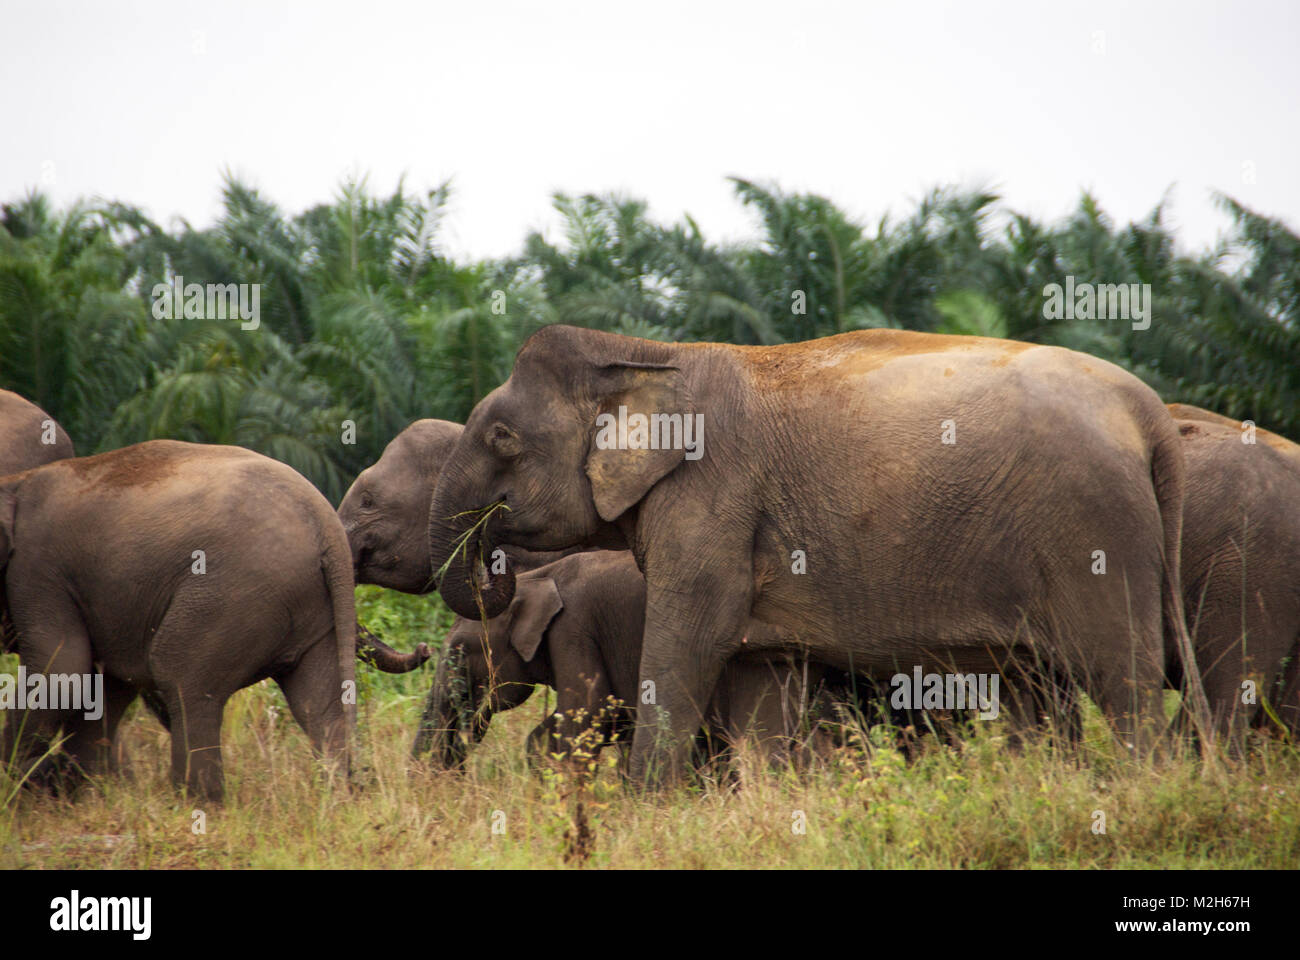 Borneo pygmy elephant (Elephas maximus borneensis) is a subspecies of the Asian elephant endemic to Borneo - listed Endangered on the IUCN Red List. Stock Photo